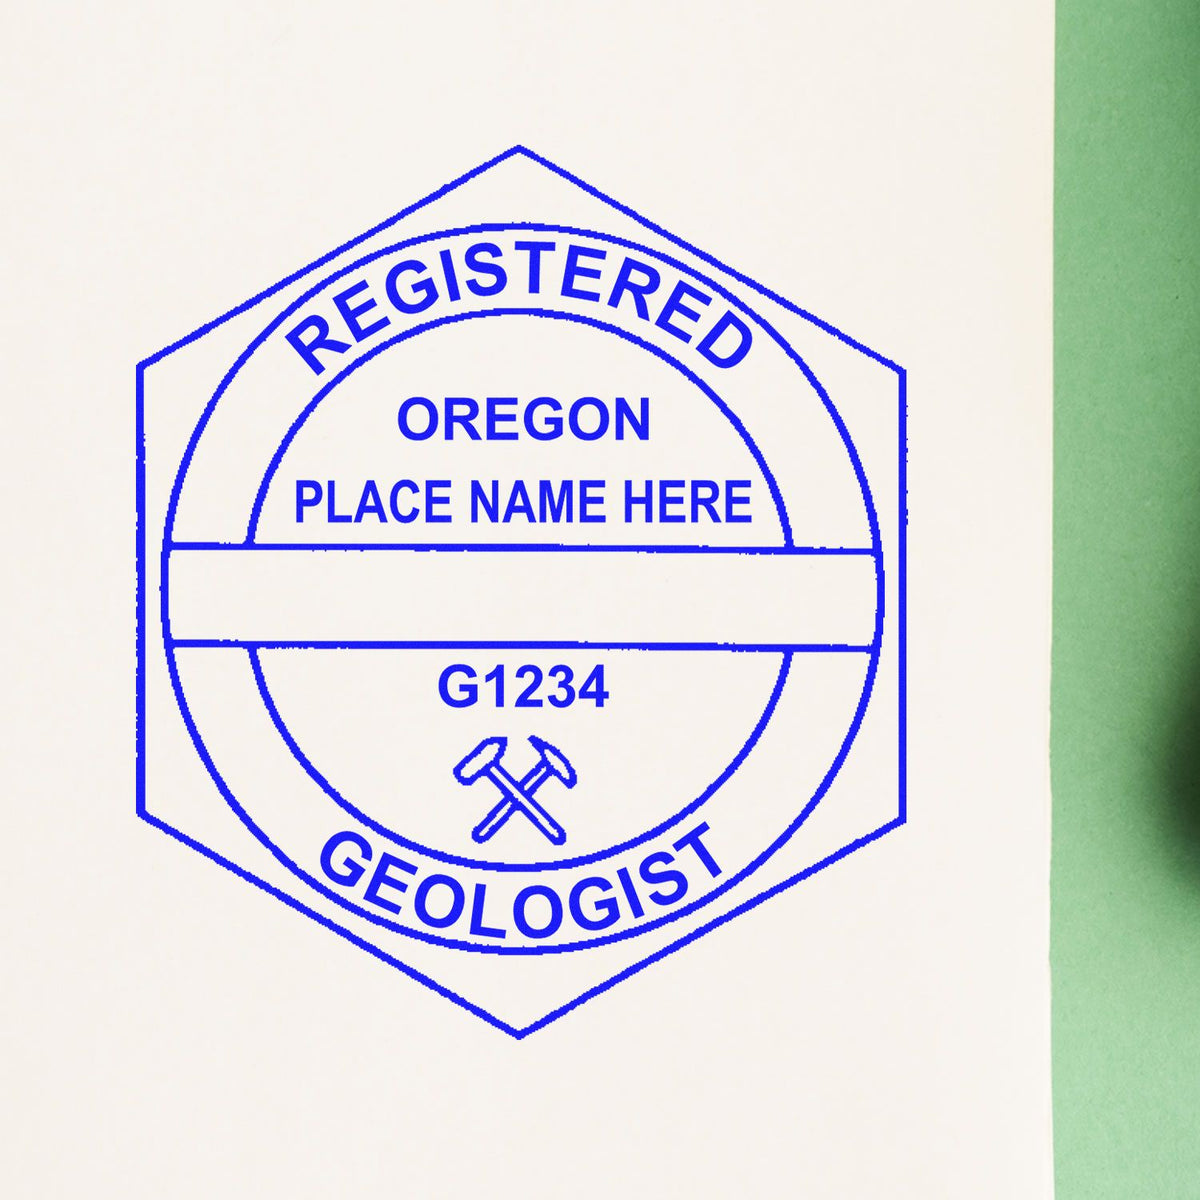 An alternative view of the Oregon Professional Geologist Seal Stamp stamped on a sheet of paper showing the image in use